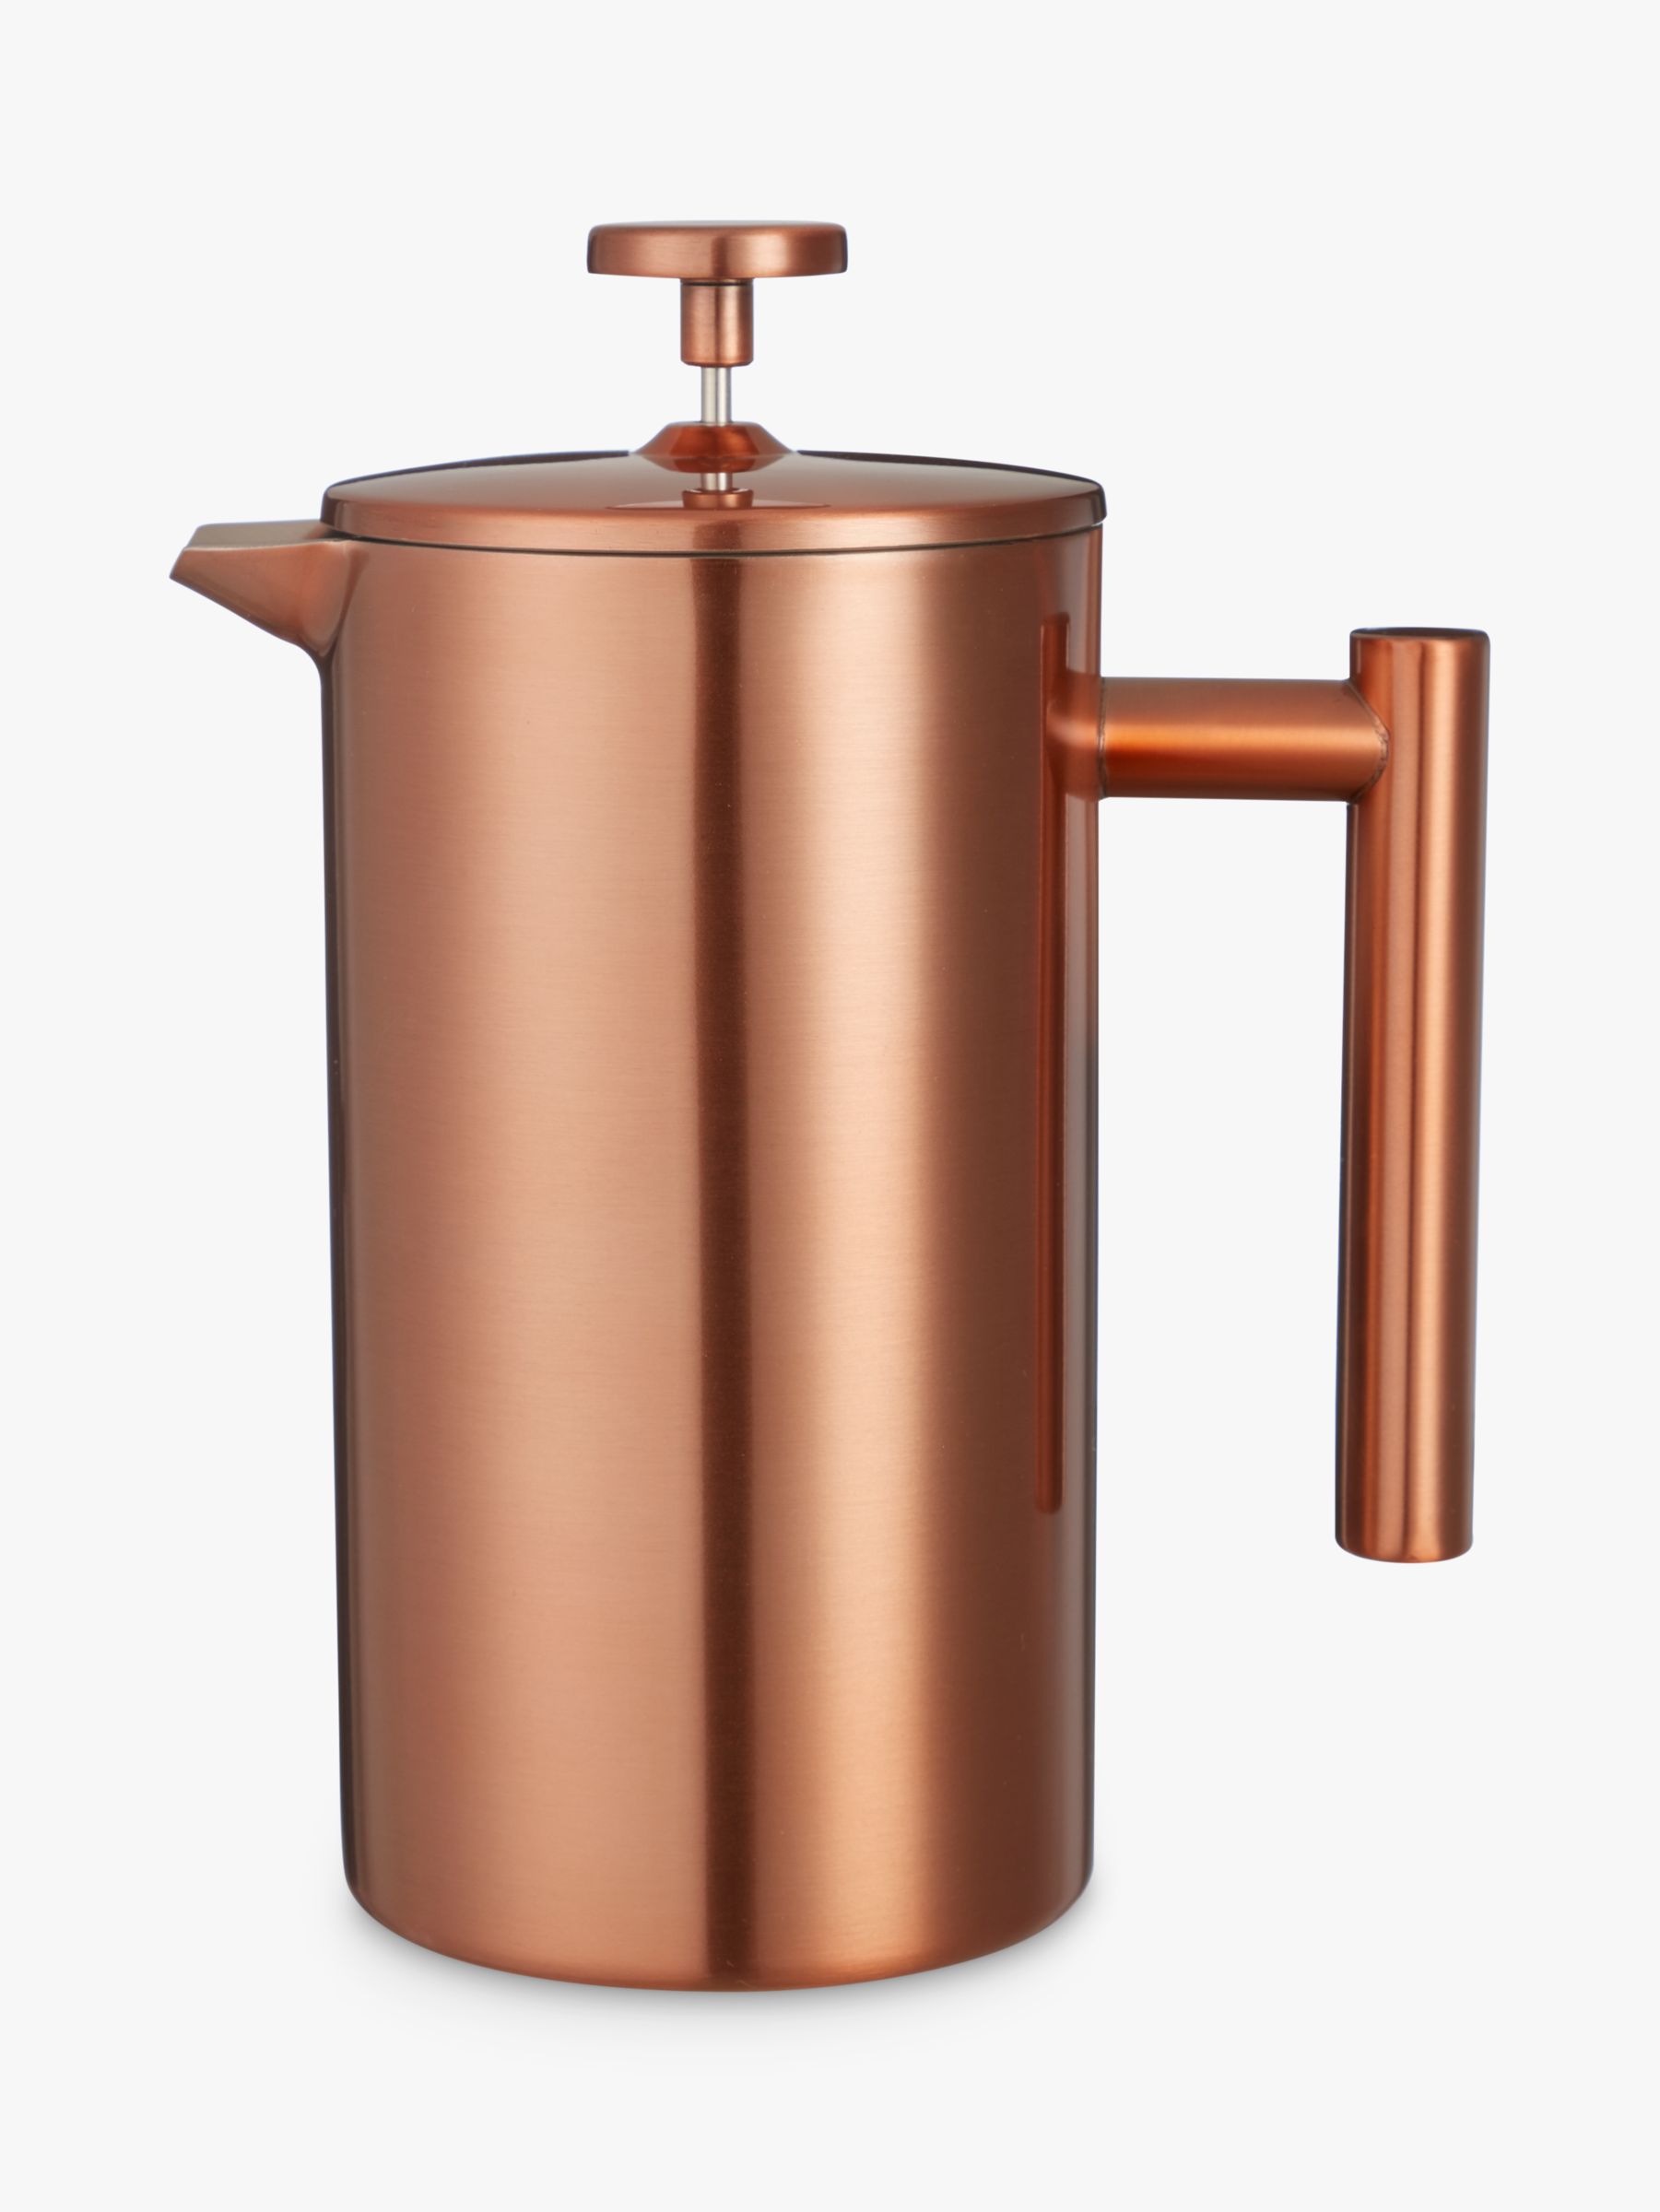 BuyCroft Collection Double Wall Cafetiere, 8 Cup, Copper, 1L Online at johnlewis.com